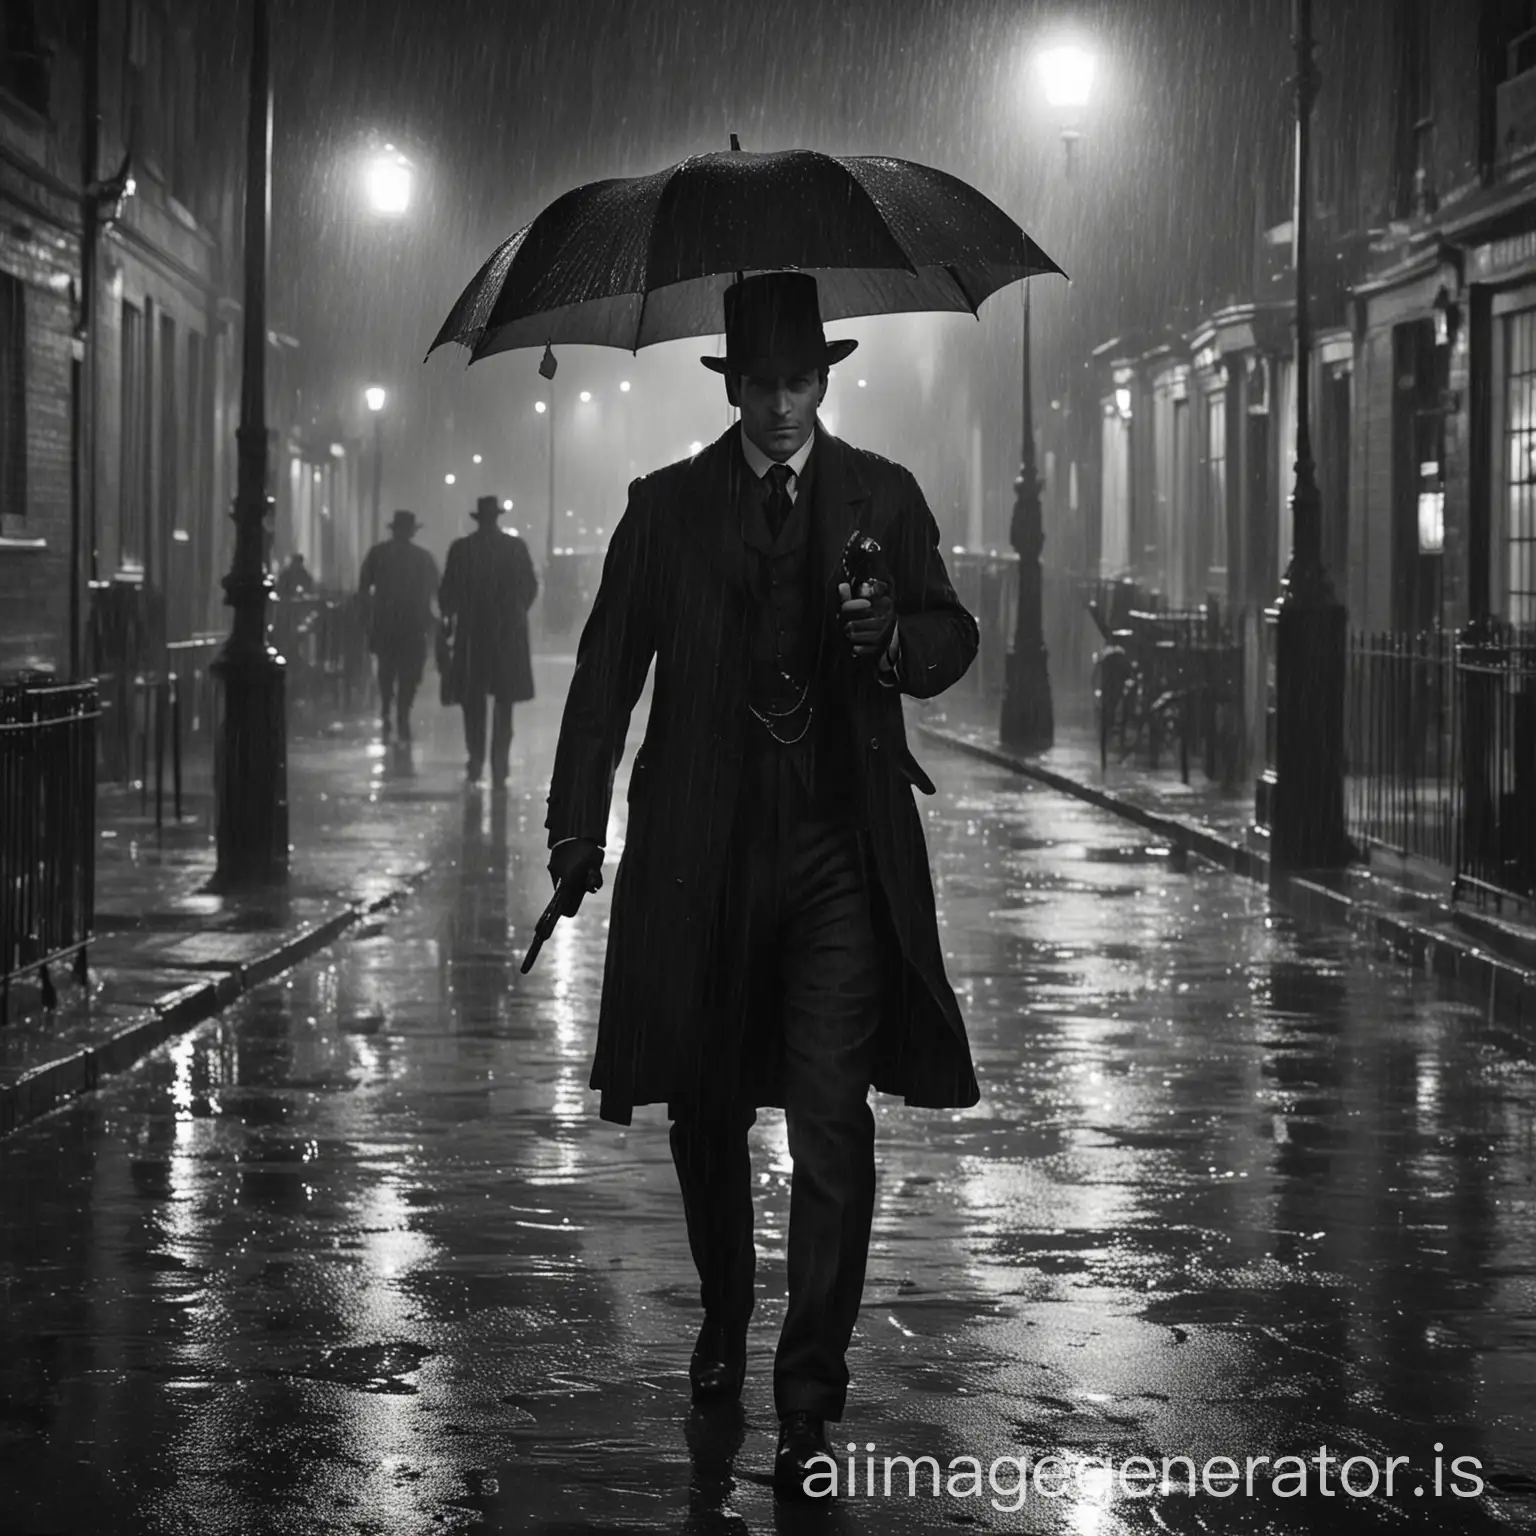 Street of London 1900 year. Heavy rain at night. Man in black suit with the pistol walking toward. No umbrella in picture. Picture quality image.